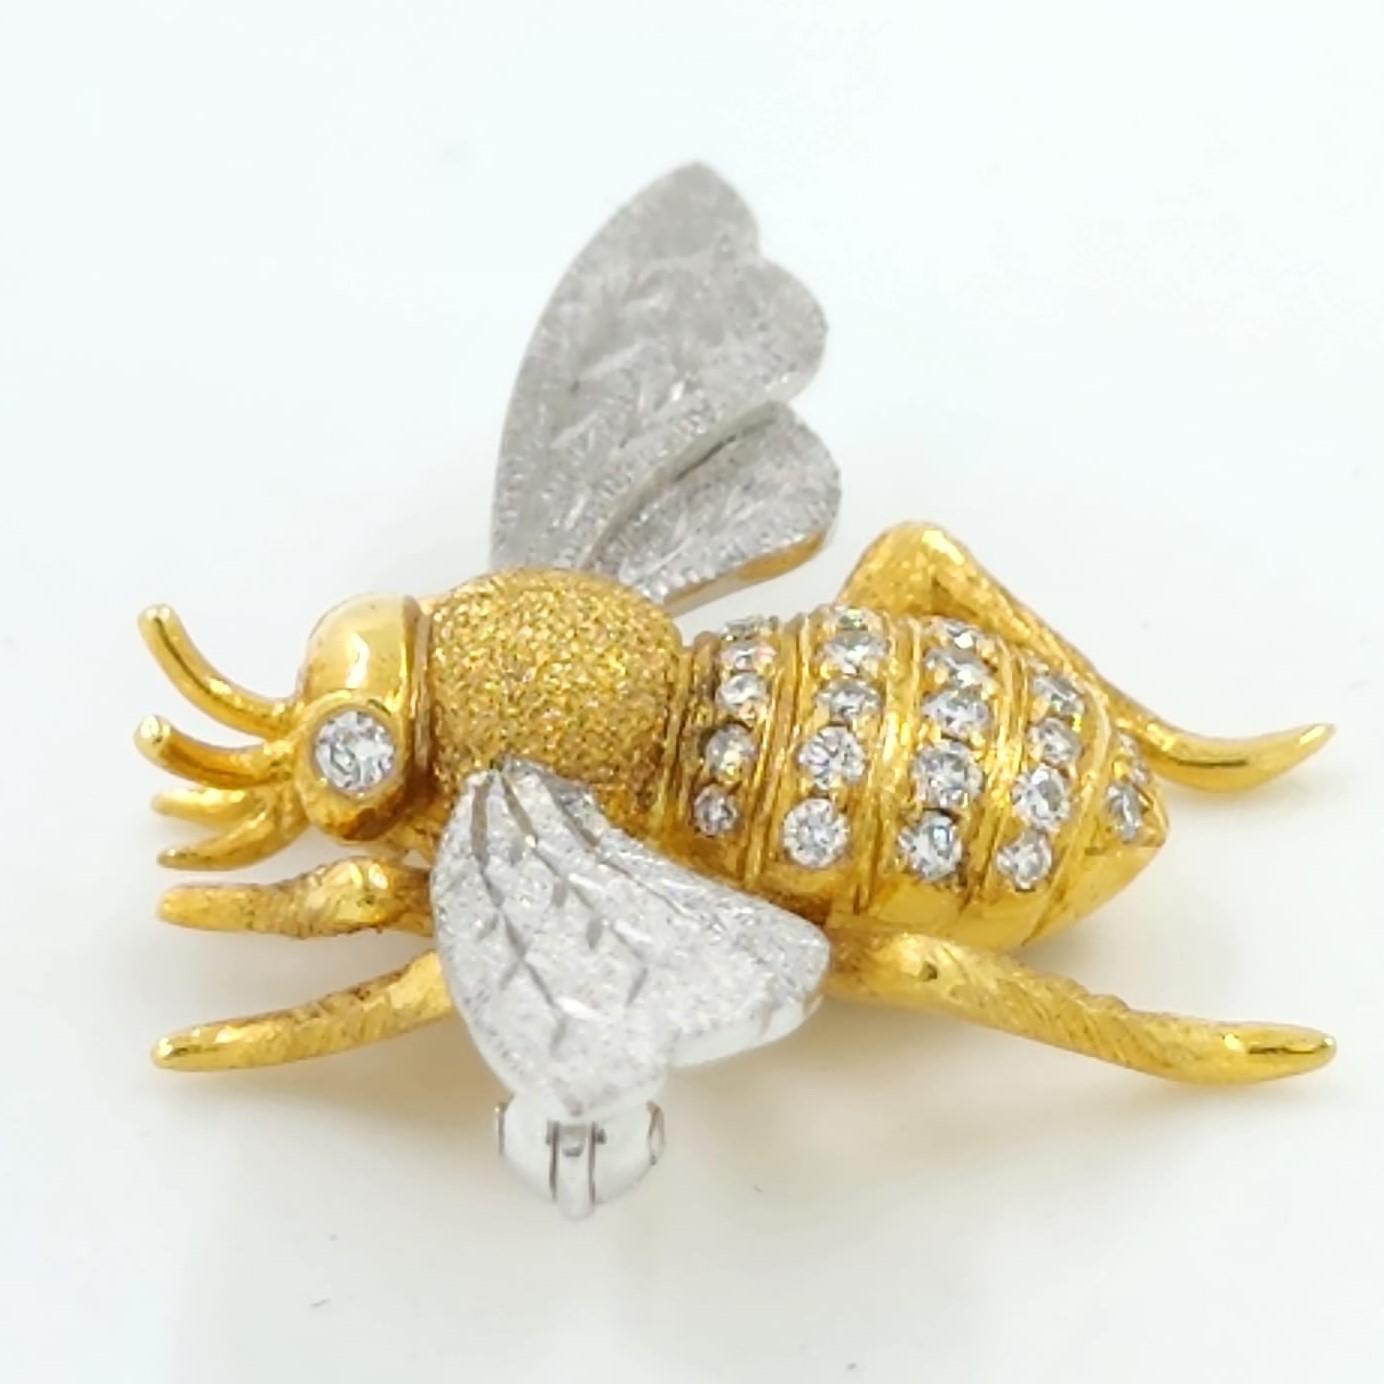 Bee lover be alert ! This bee brooch / pin is handcrafted and set in 18 karat white and yellow gold. The latter is set with 0.56carat of brilliant cut diamonds. The wing is make with 18 karat white gold with a silky-like finishing. The bee offer